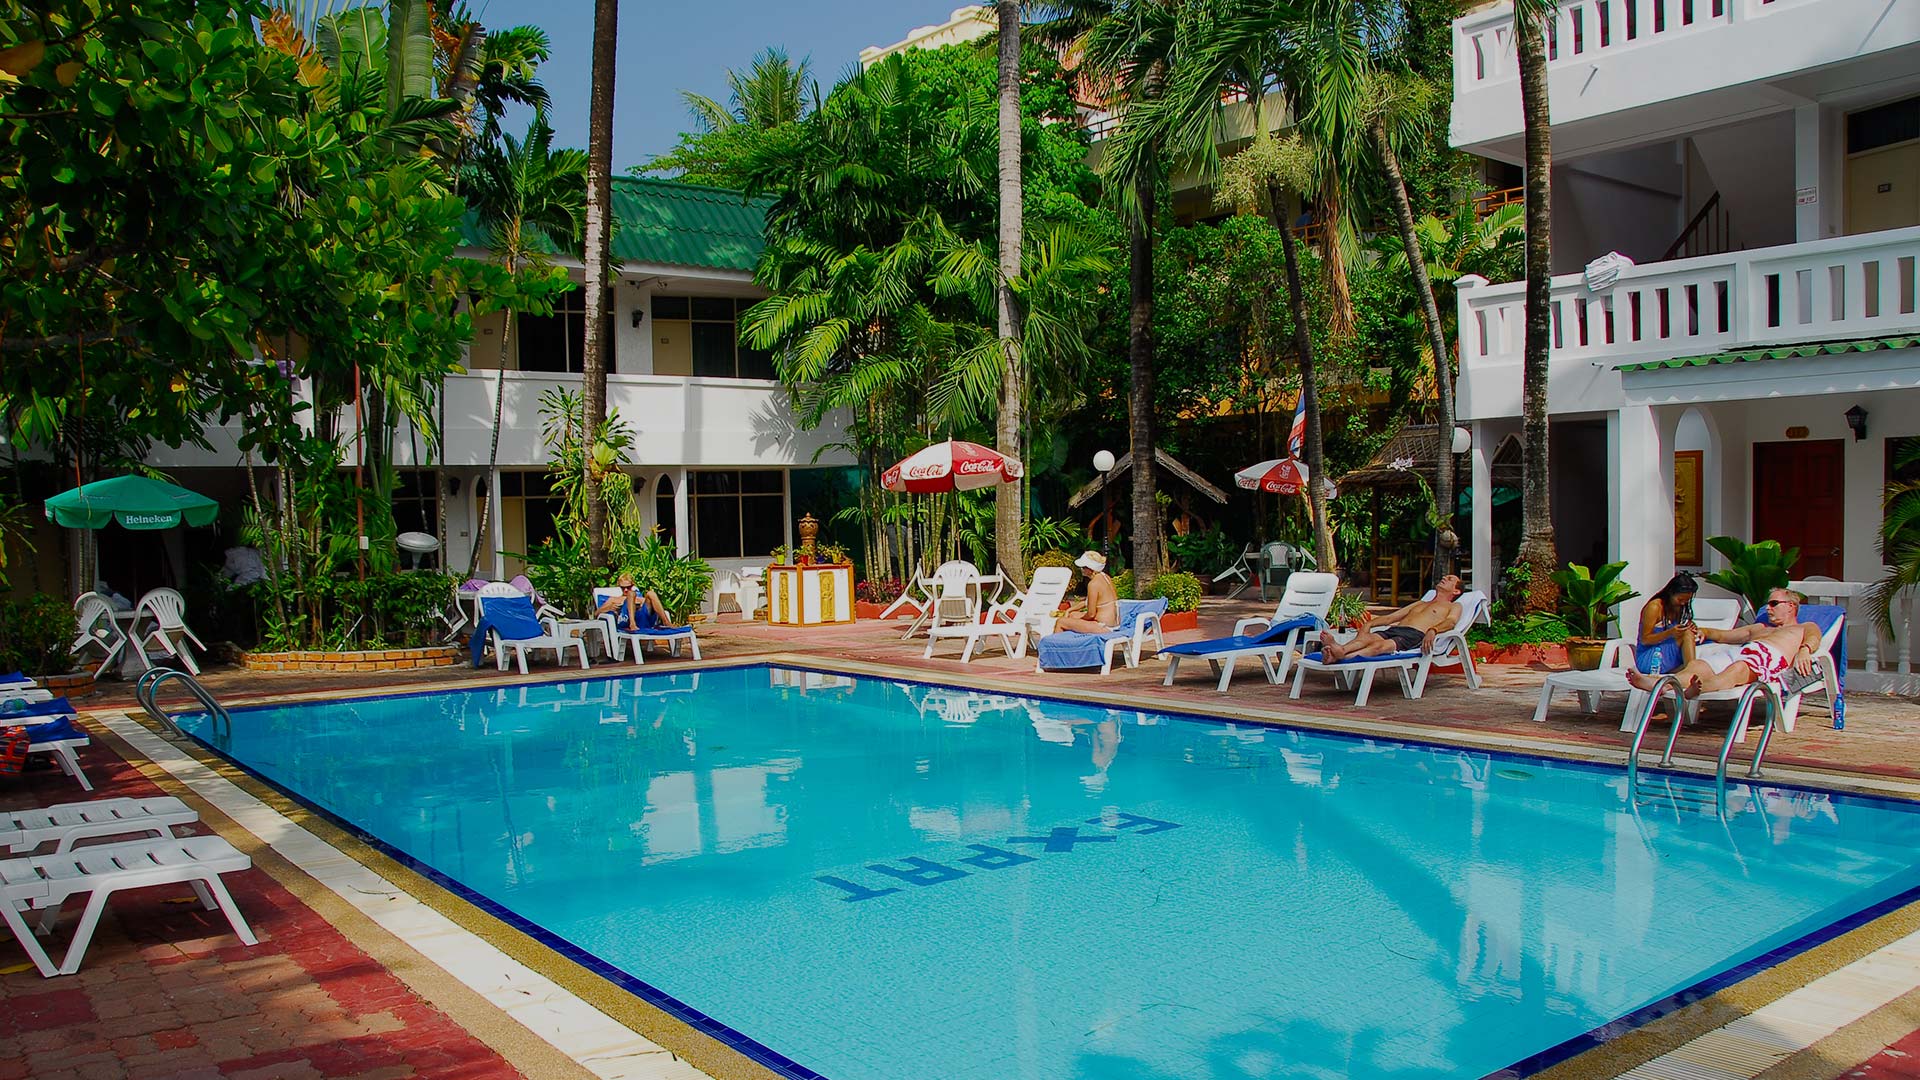 The Patong Center Hotel in Phuket